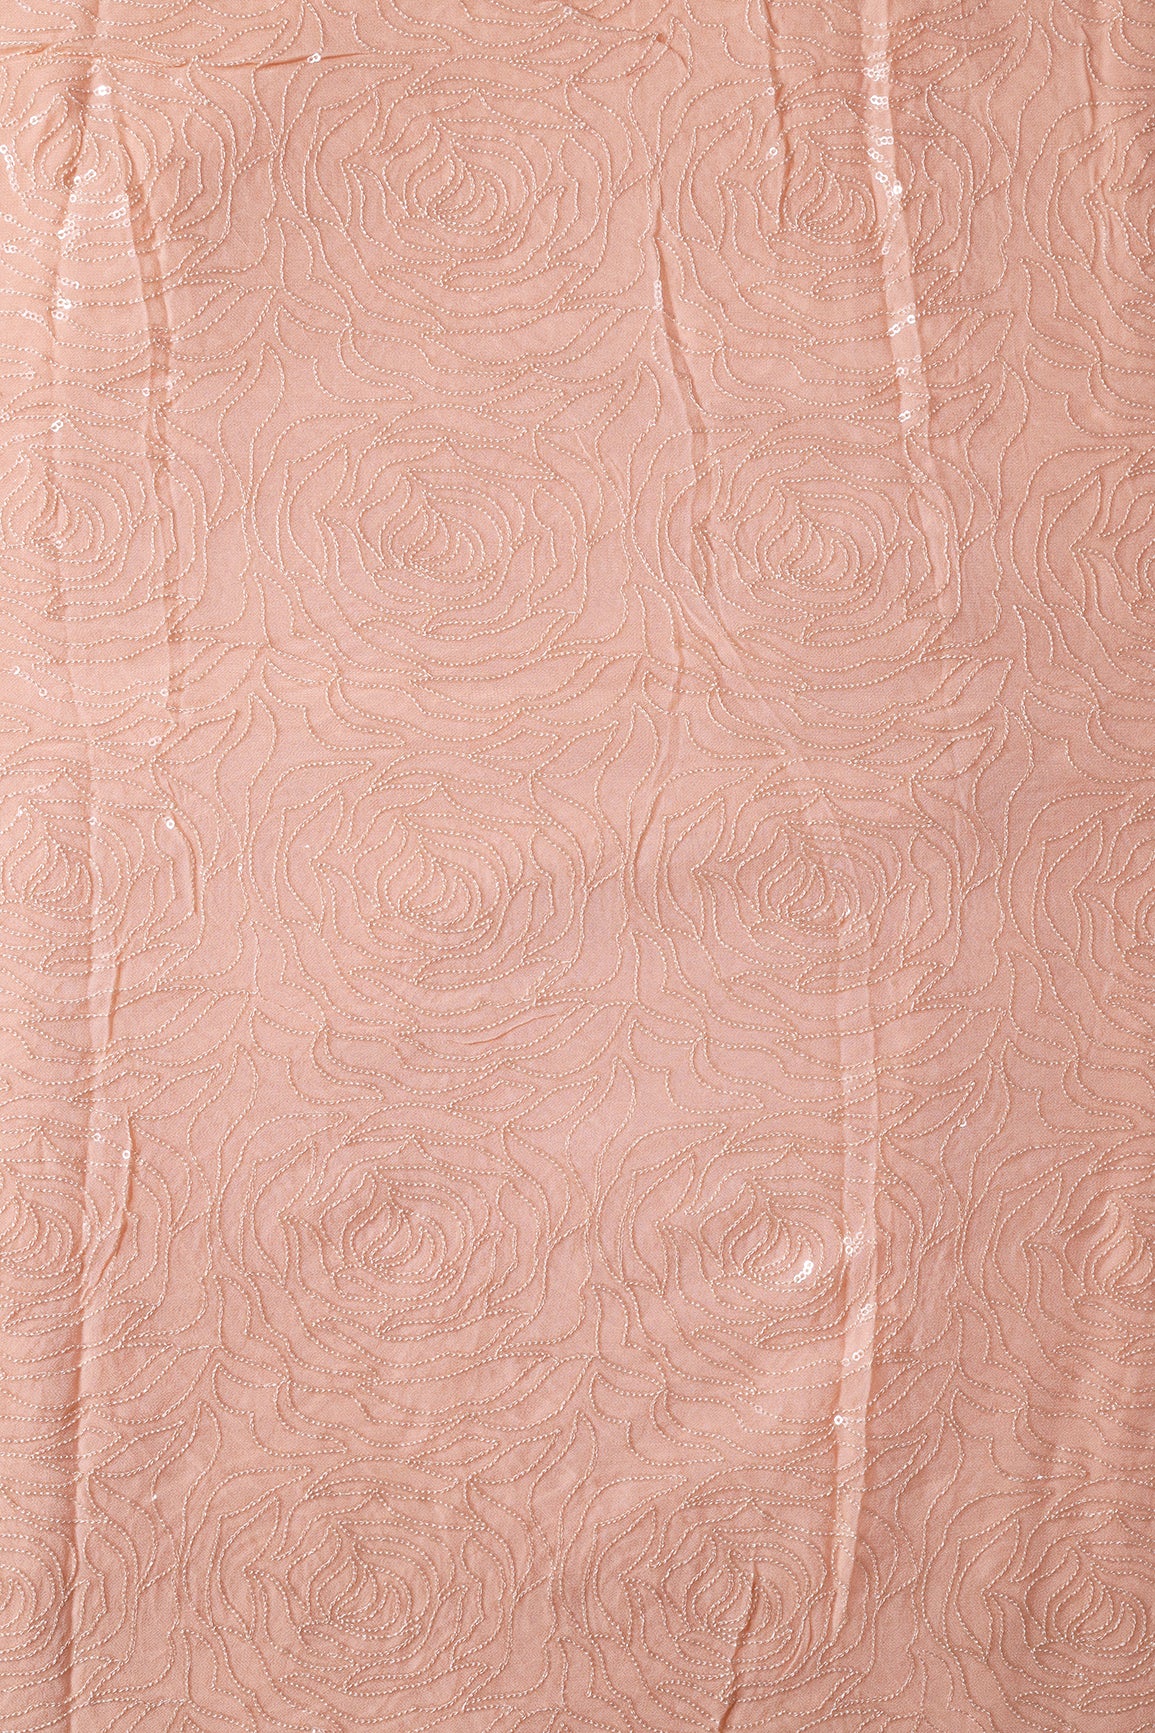 Water Sequins Floral Heavy Embroidery On Peach Viscose Georgette Fabric